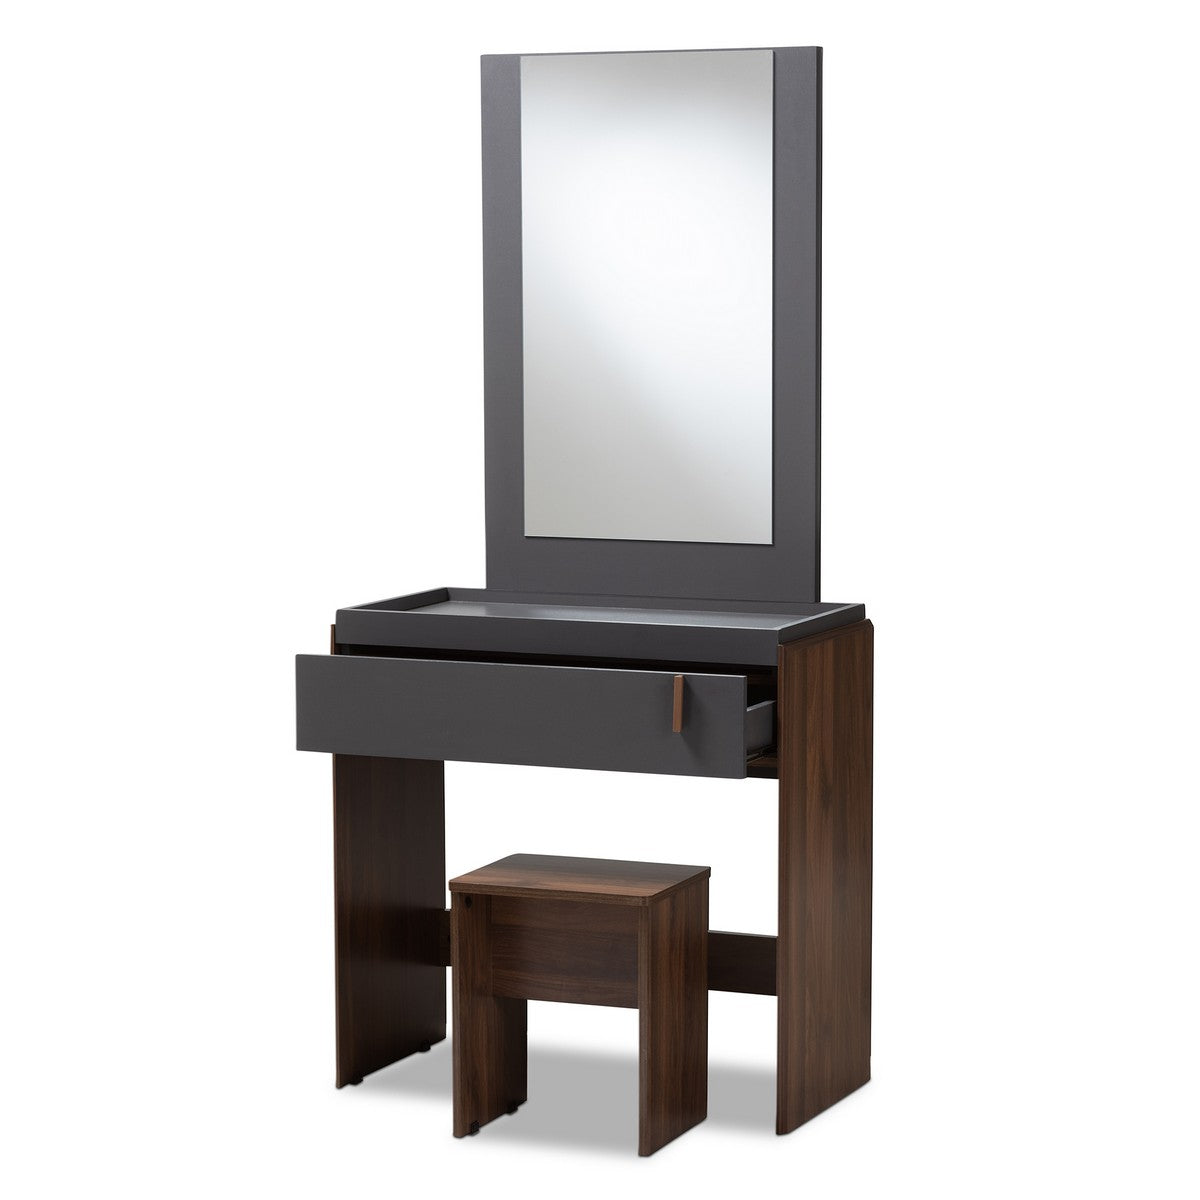 Baxton Studio Rikke Modern and Contemporary Two-Tone Gray and Walnut Finished Wood Bedroom Vanity with Stool